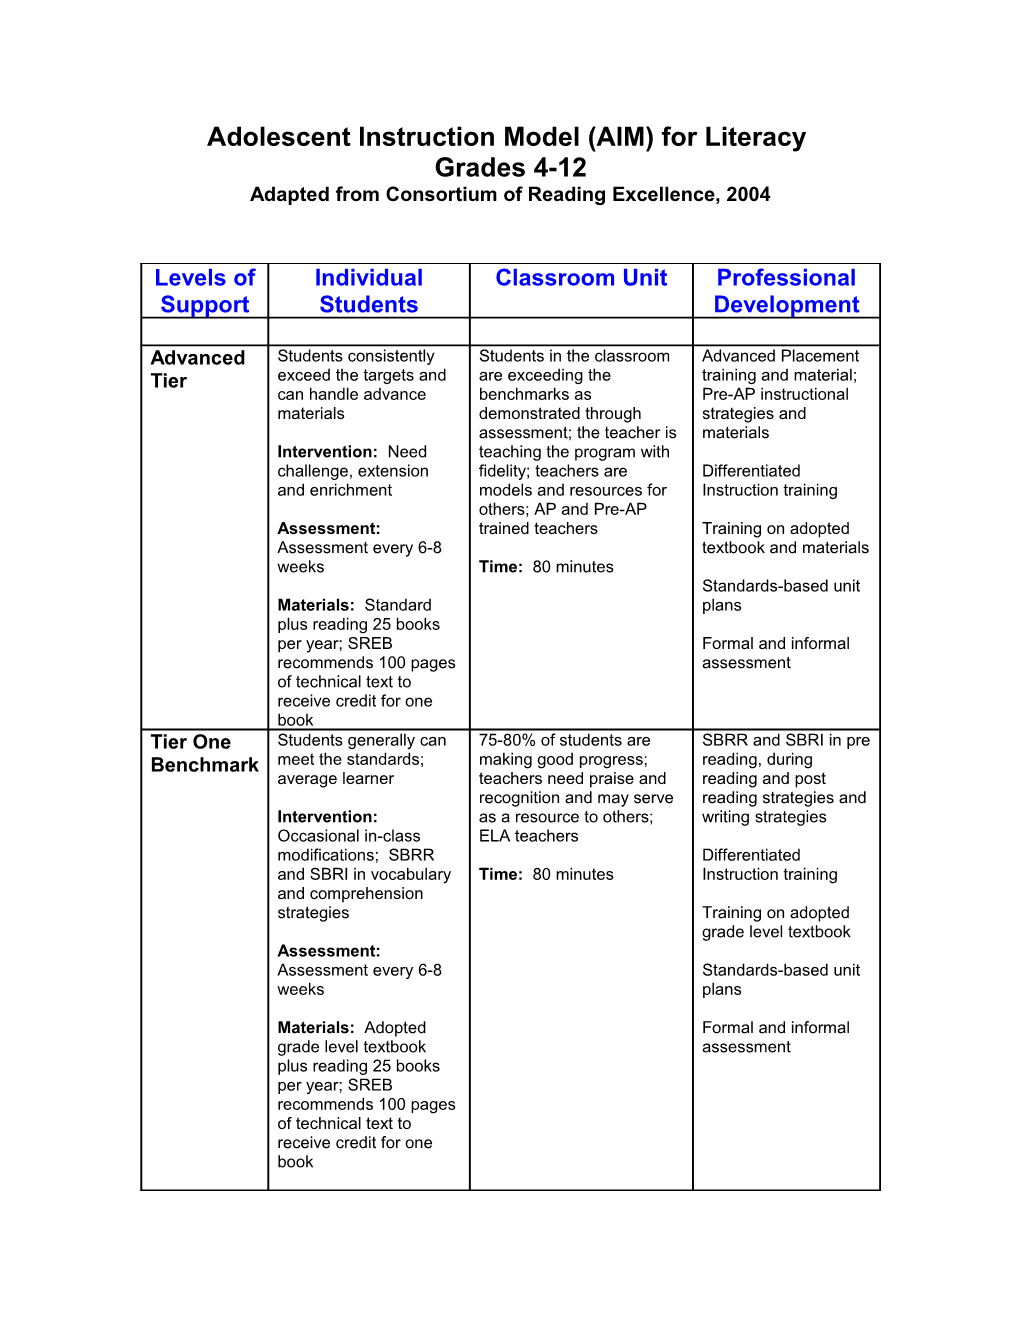 Adolescent Instructional Model (AIM) for Literacy